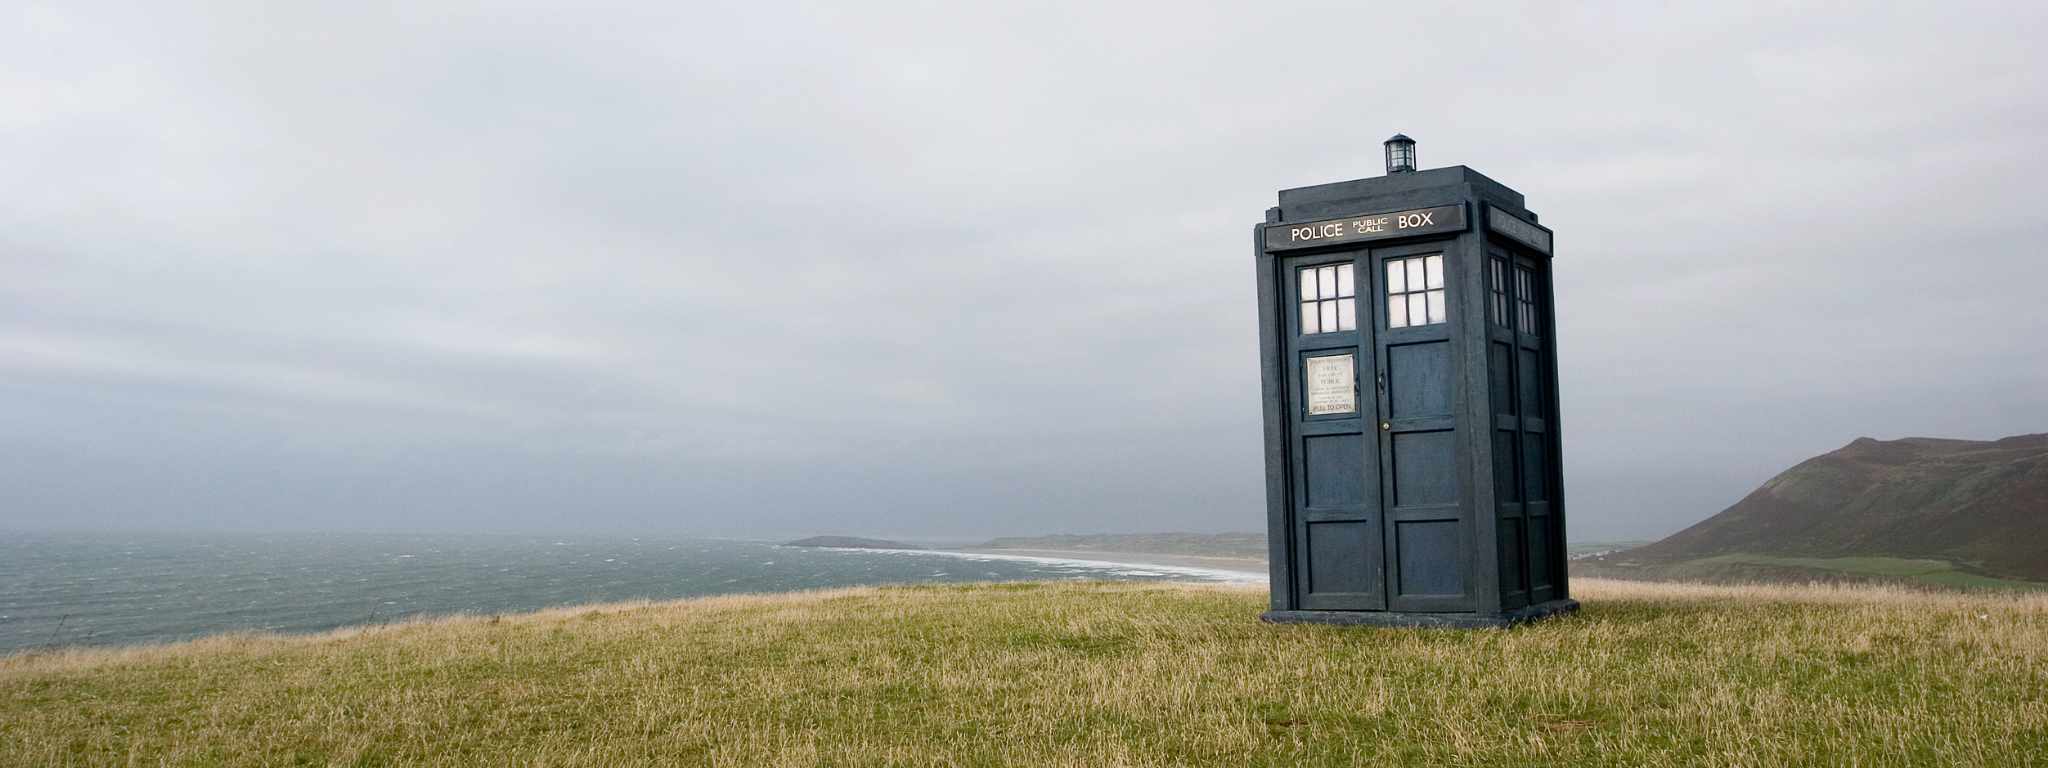 Doctor Who's Police Box Tardis on the headland of Rhossili Bay, with beach and sea behind